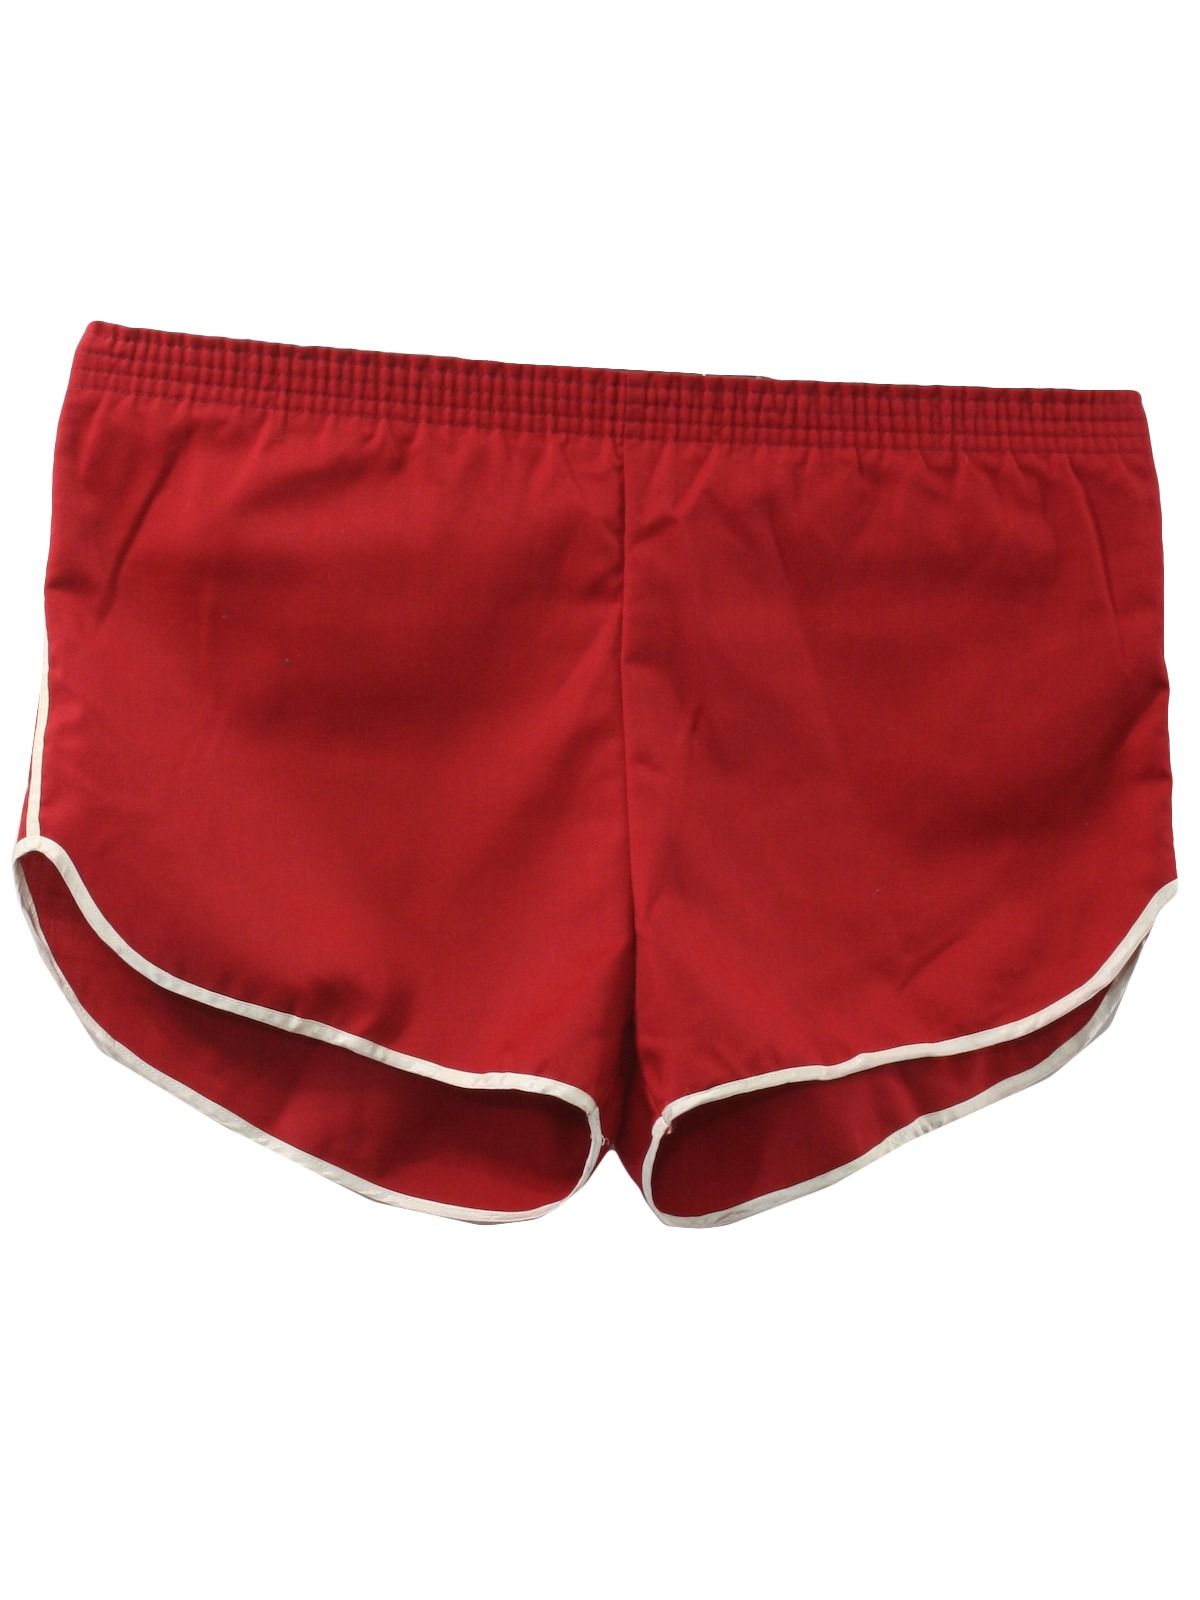 Fabric Label Seventies Vintage Shorts: 70s -Fabric Label- Mens red ...